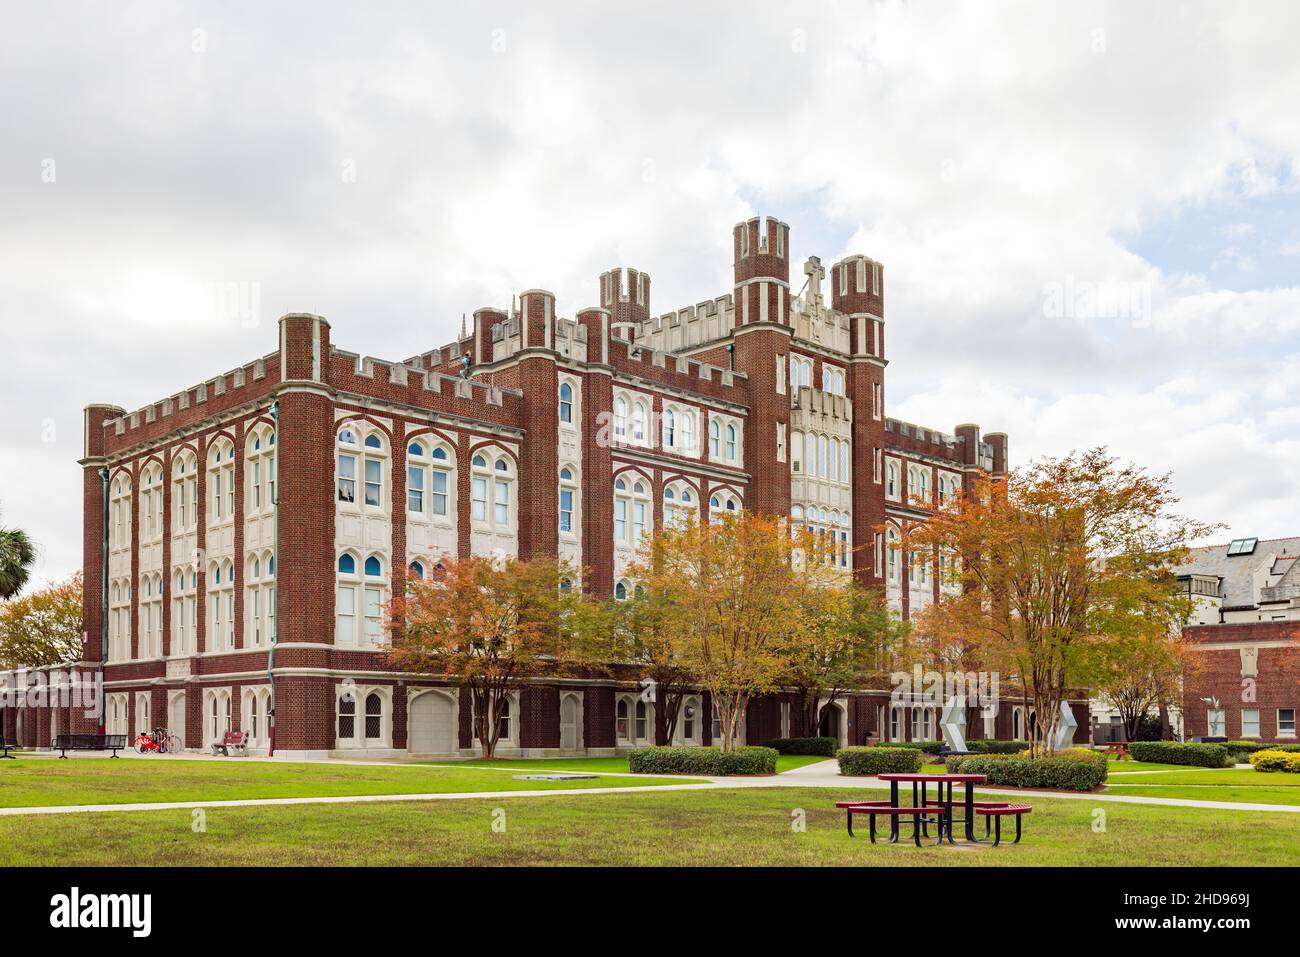 Overcast view of the Loyola University New Orleans at Louisiana Stock Photo